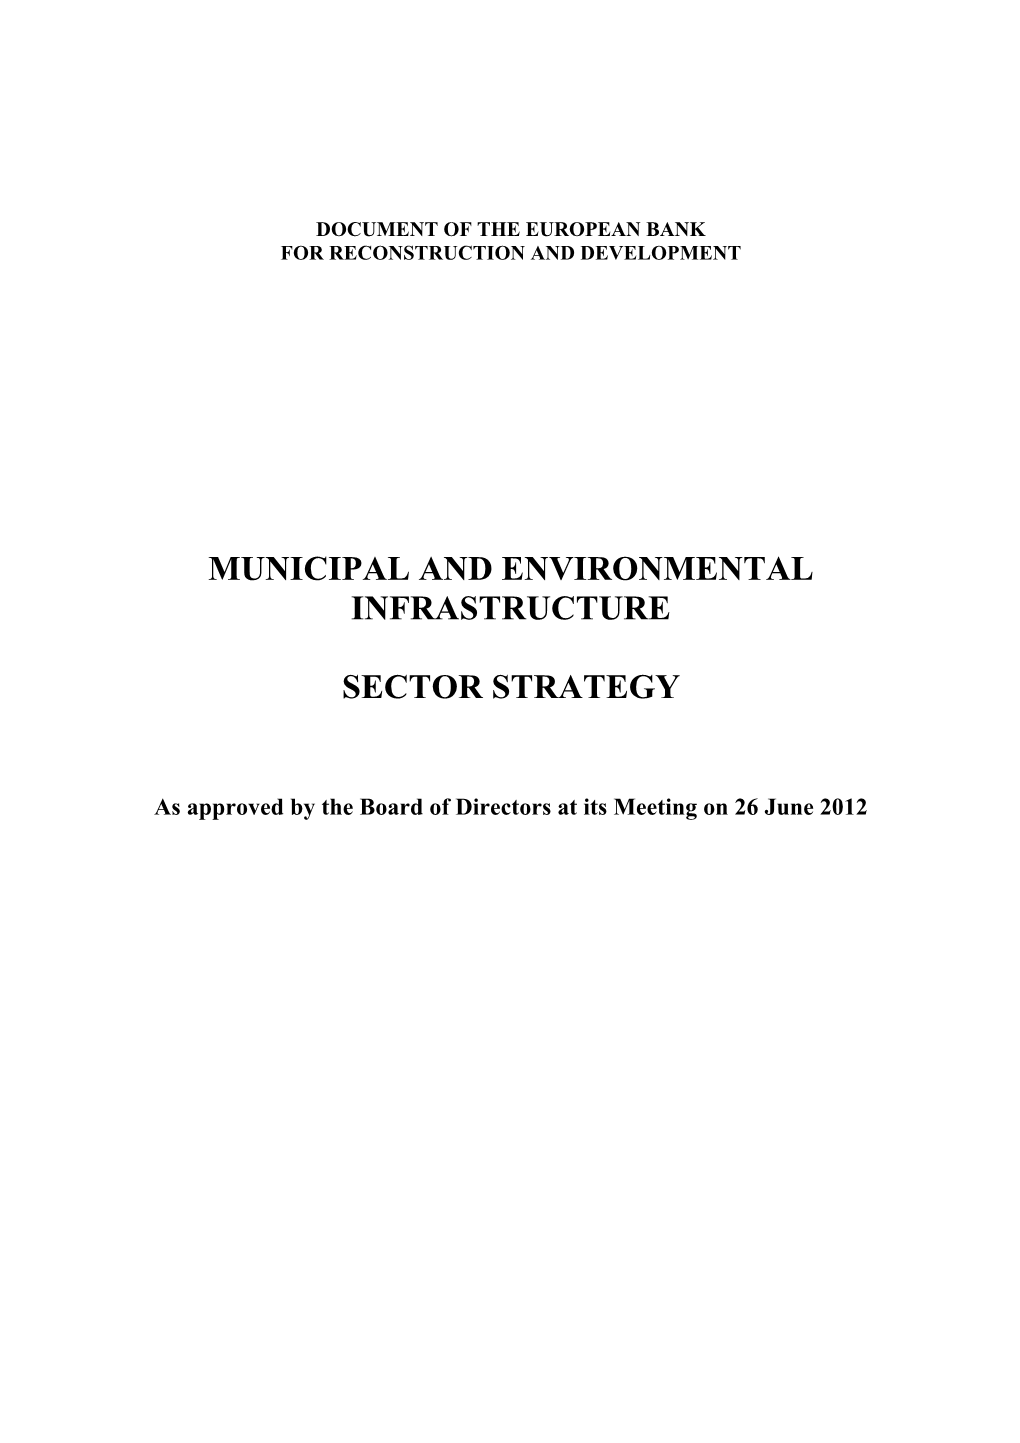 Municipal and Environmental Infrastructure